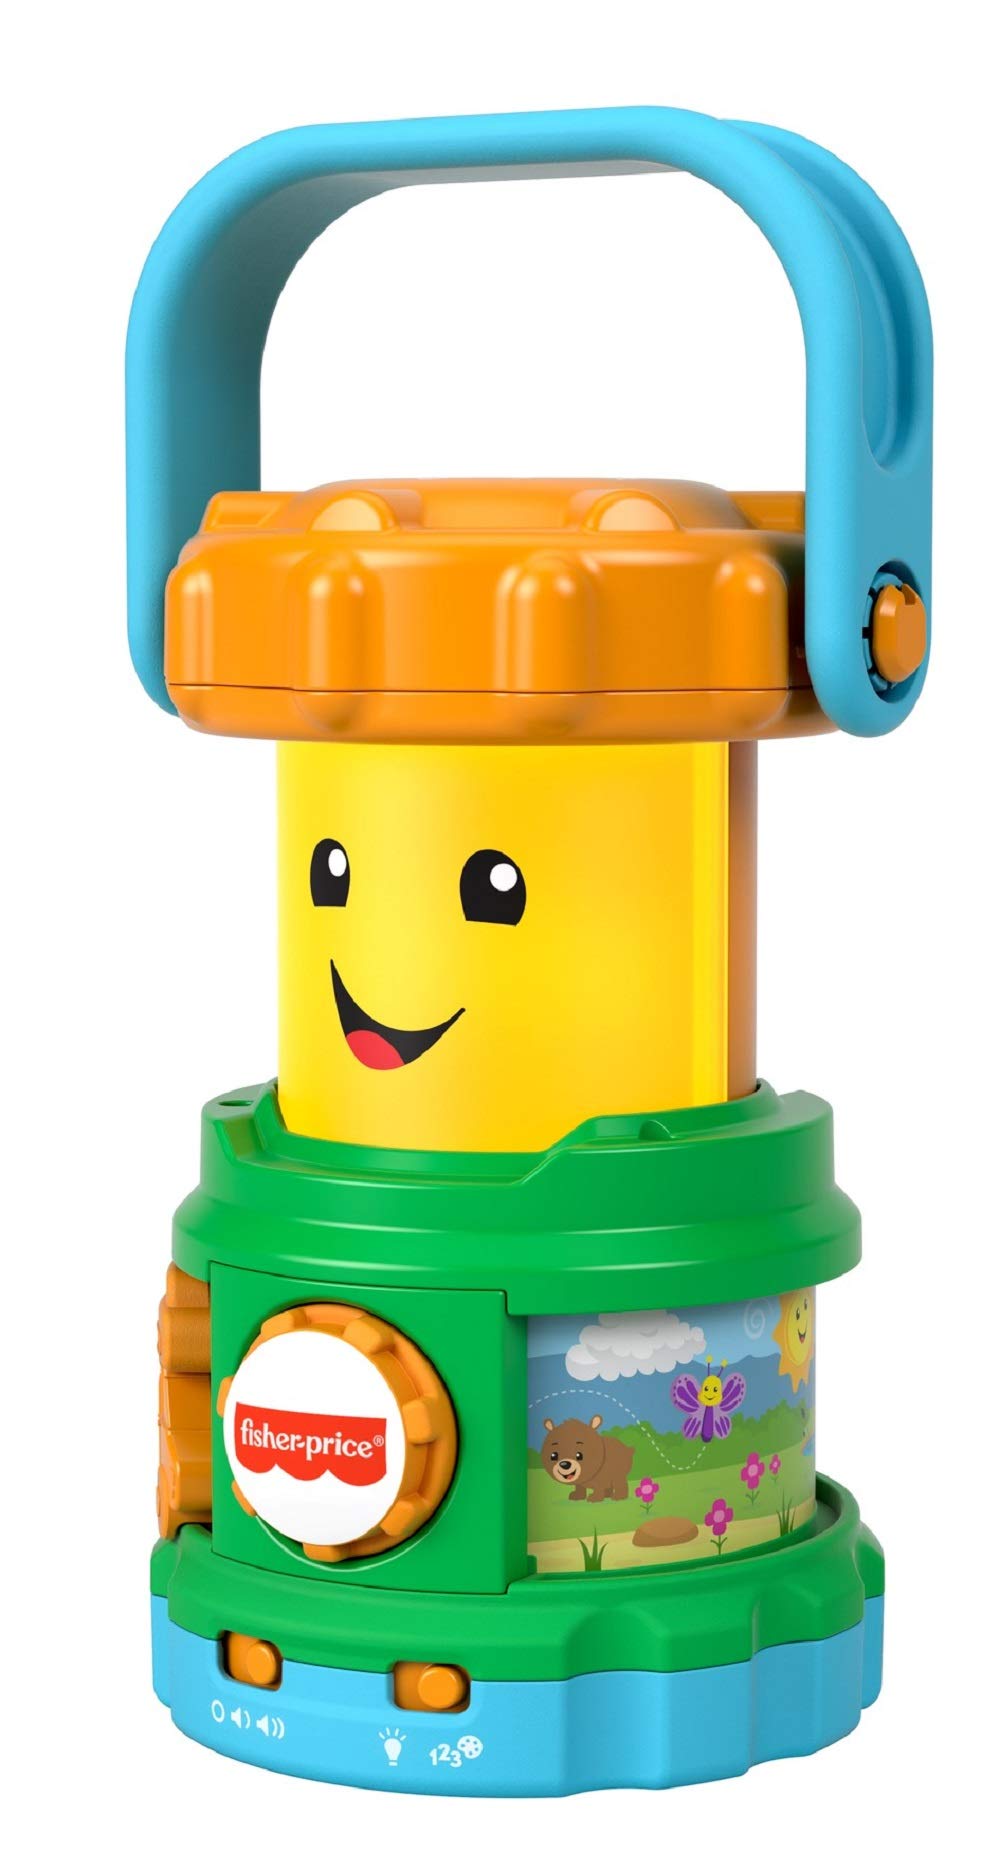 Fisher-Price Laugh & Learn Camping Fun Lantern, musical toy with lights, sounds and learning content for baby and toddler ages 6-36 months